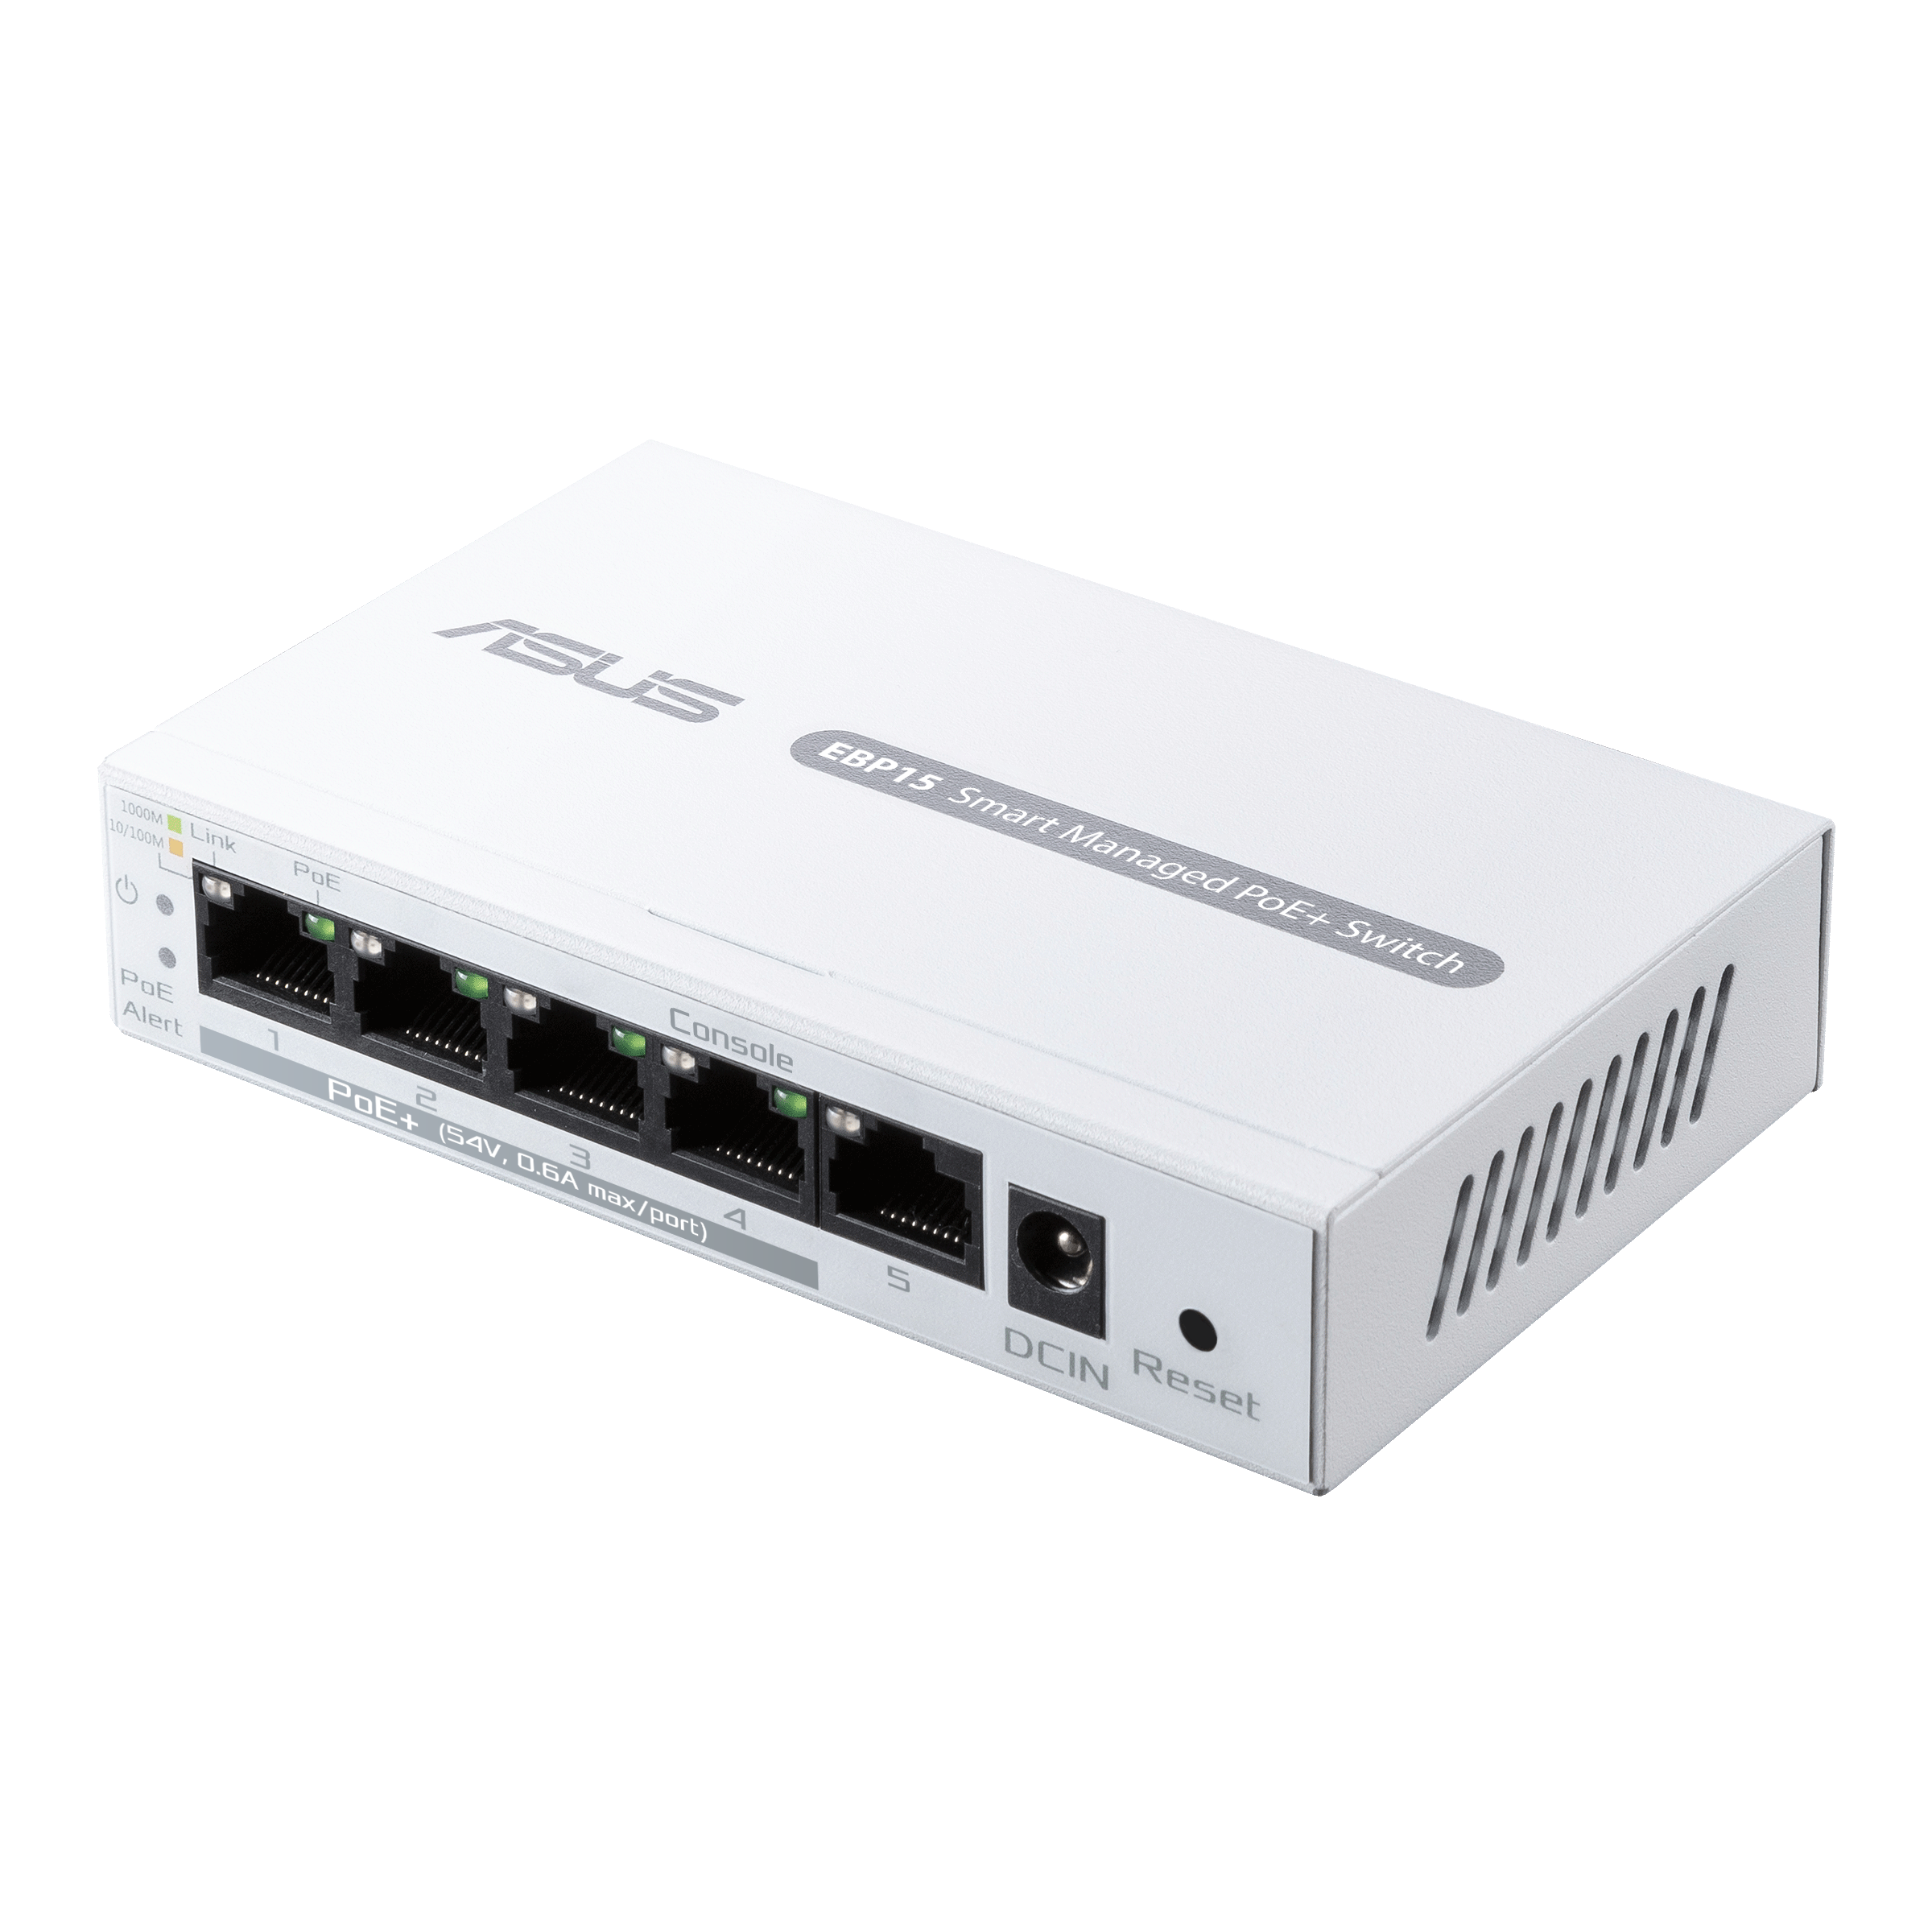 ASUS ExpertWiFi EBP15 5-Port GbE Smart Managed PoE+ Switch